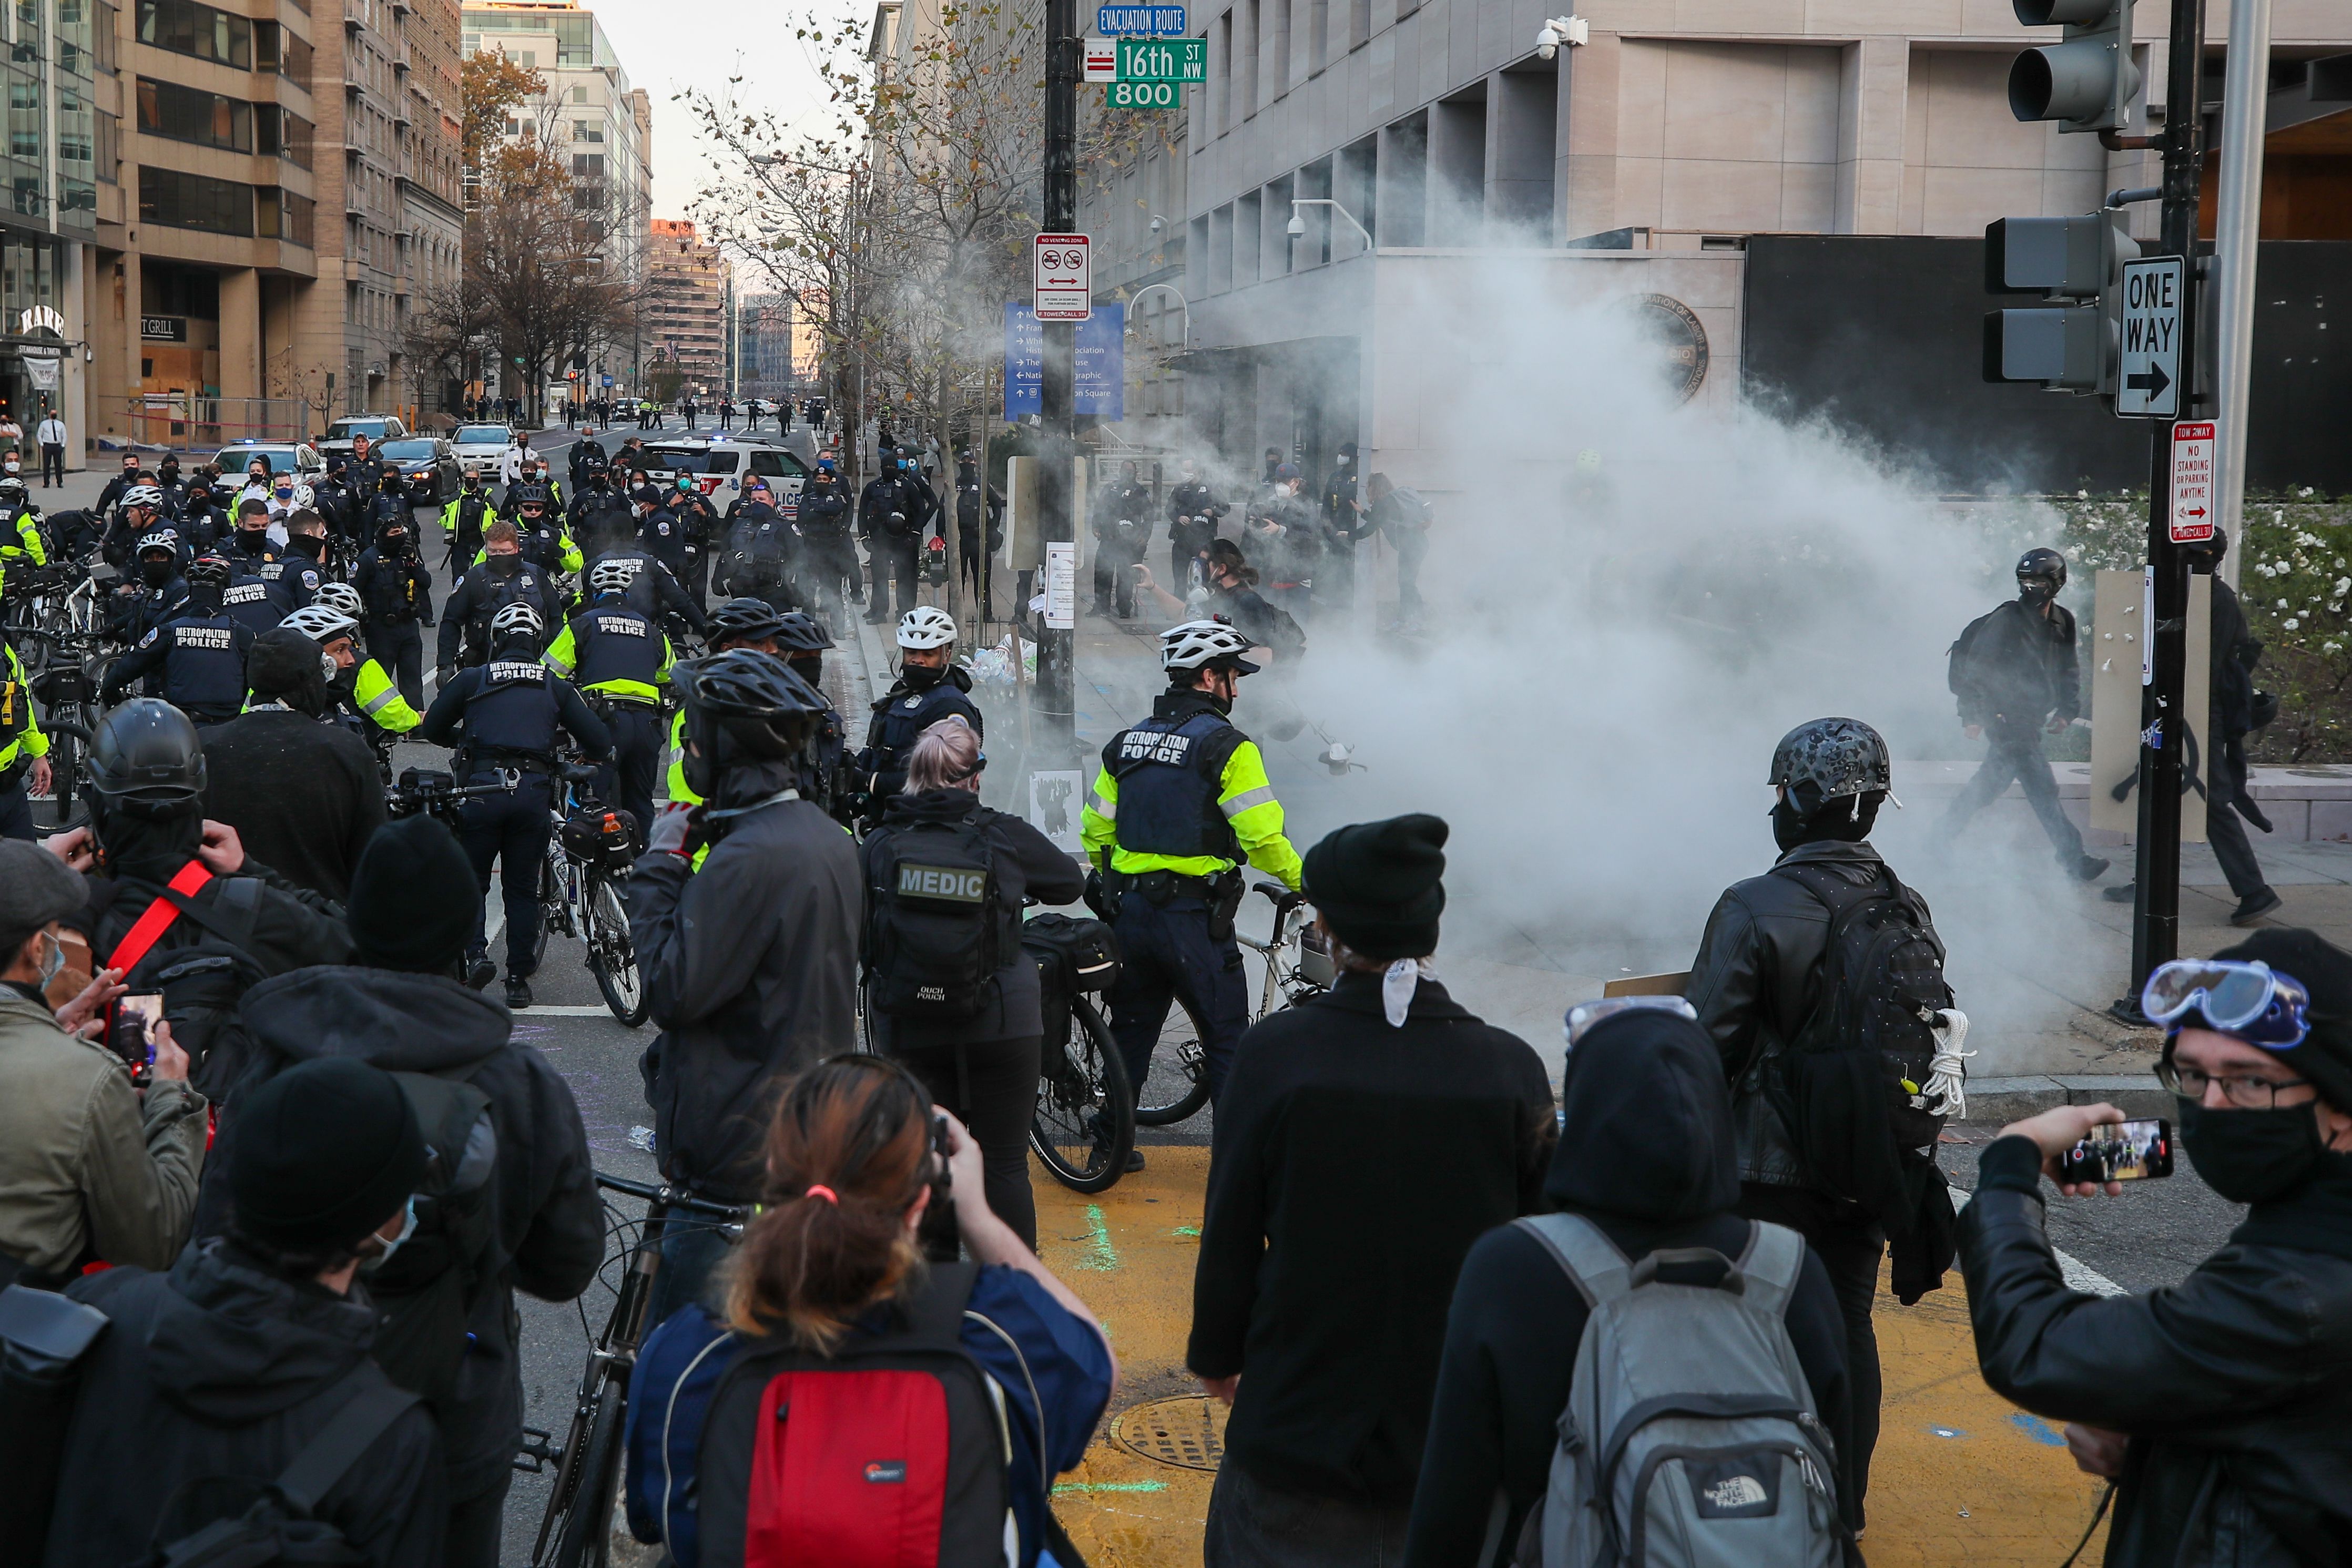 BLM protesters and Antifa clash with police as police officers intervene them with tear cas canisters at the BLM plaza in Washington, DC, United States on December 12